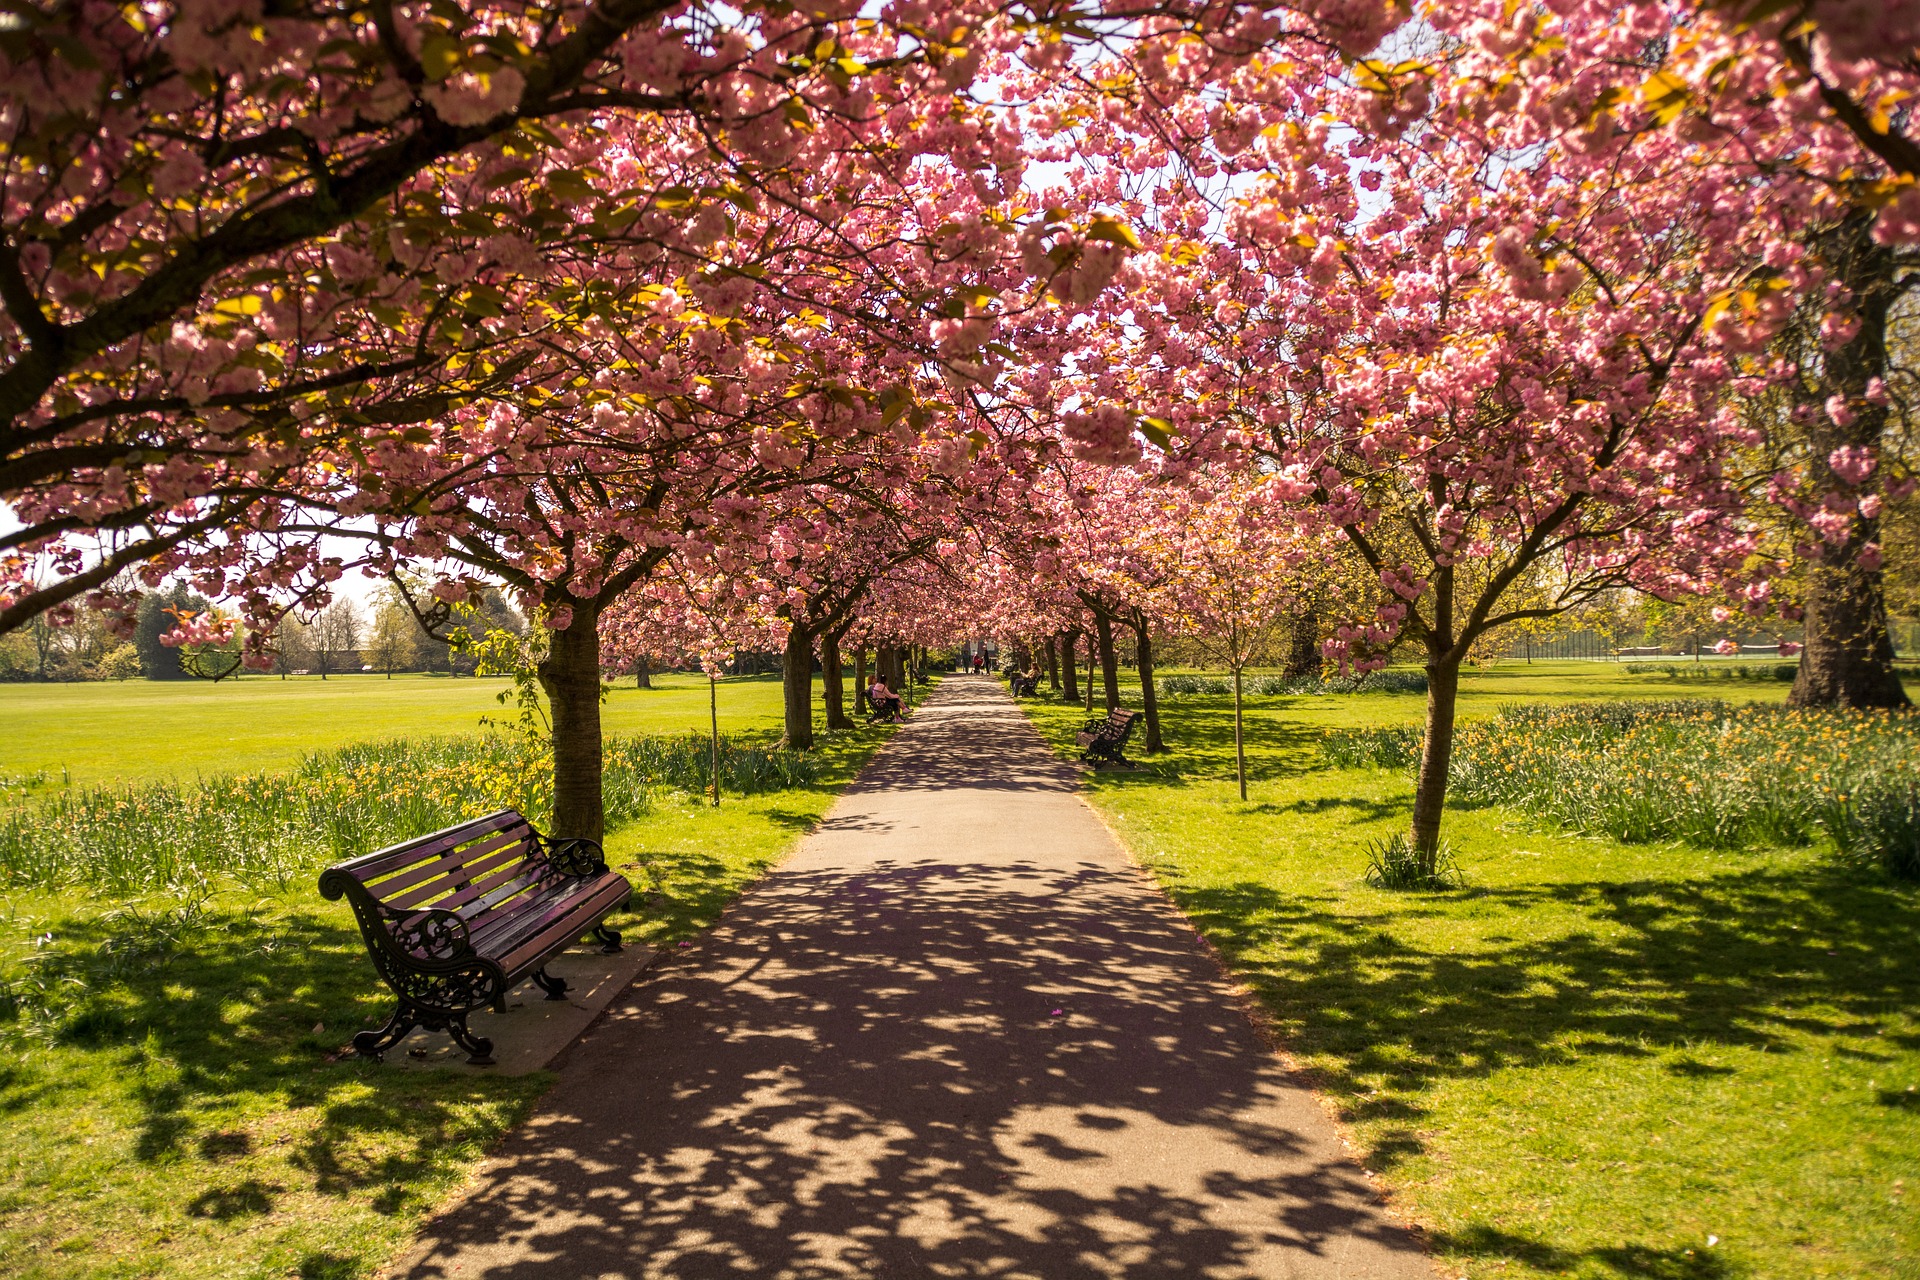 Cherry blossoms and park chairs by a park path